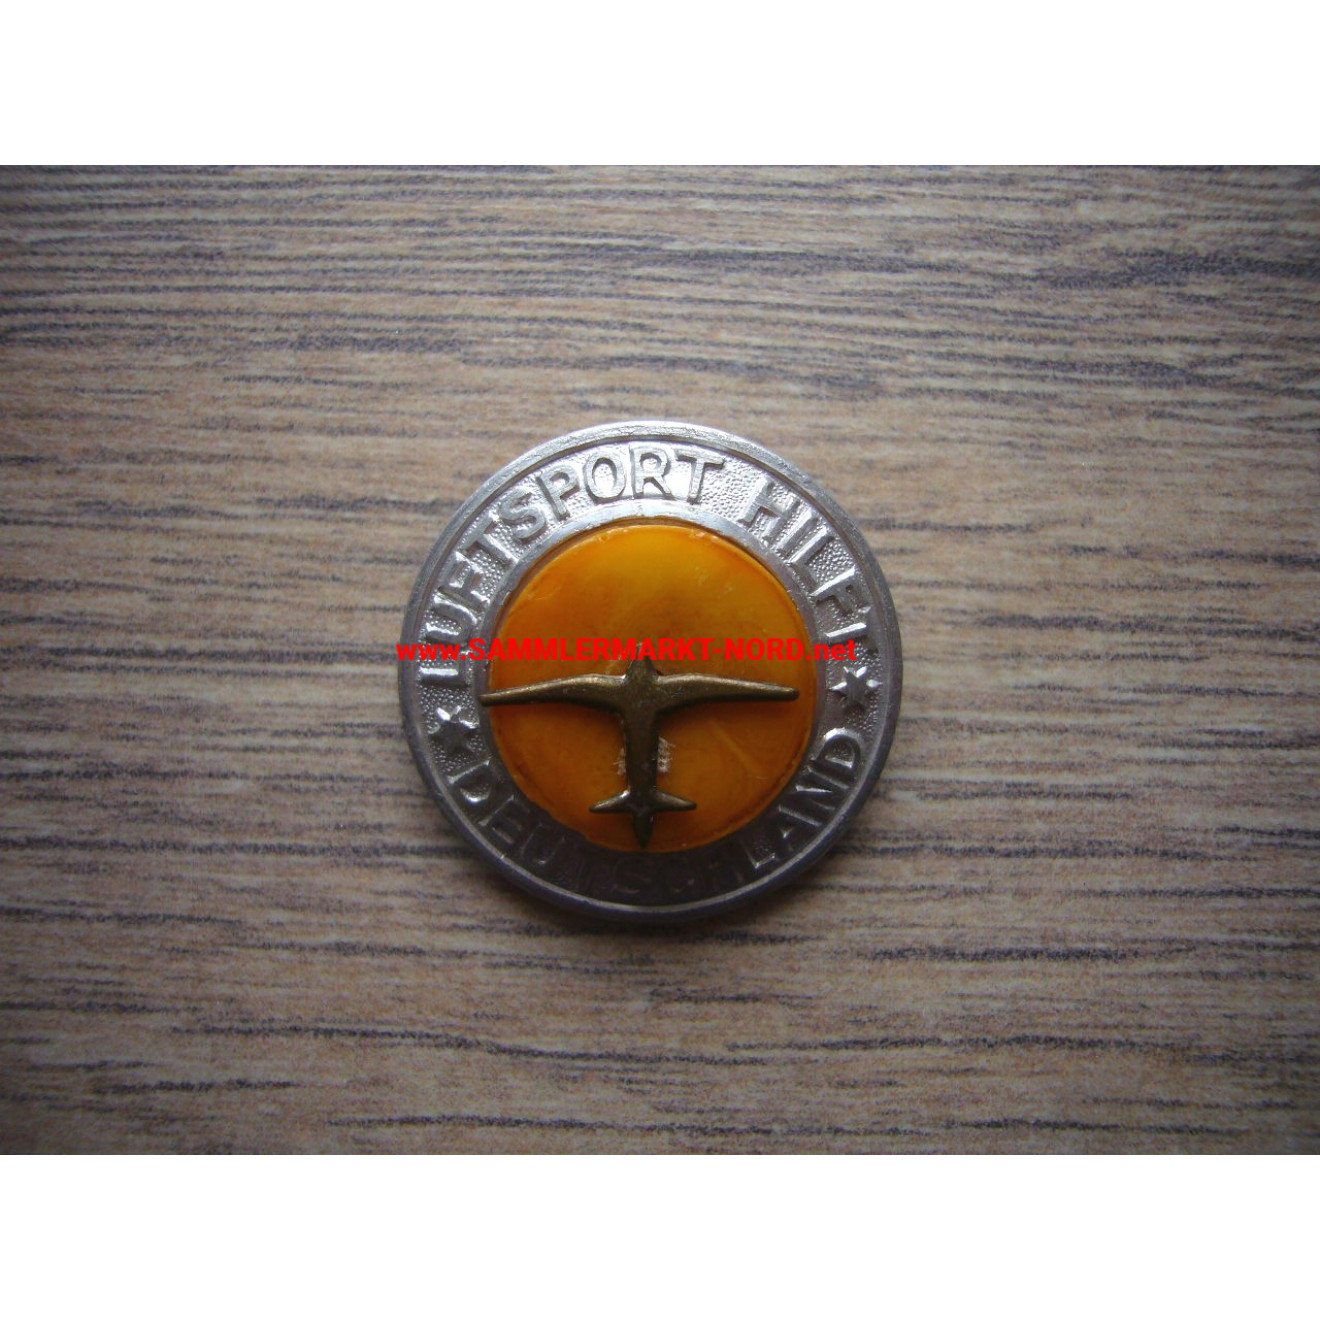 Aviation helps Germany - amber badge